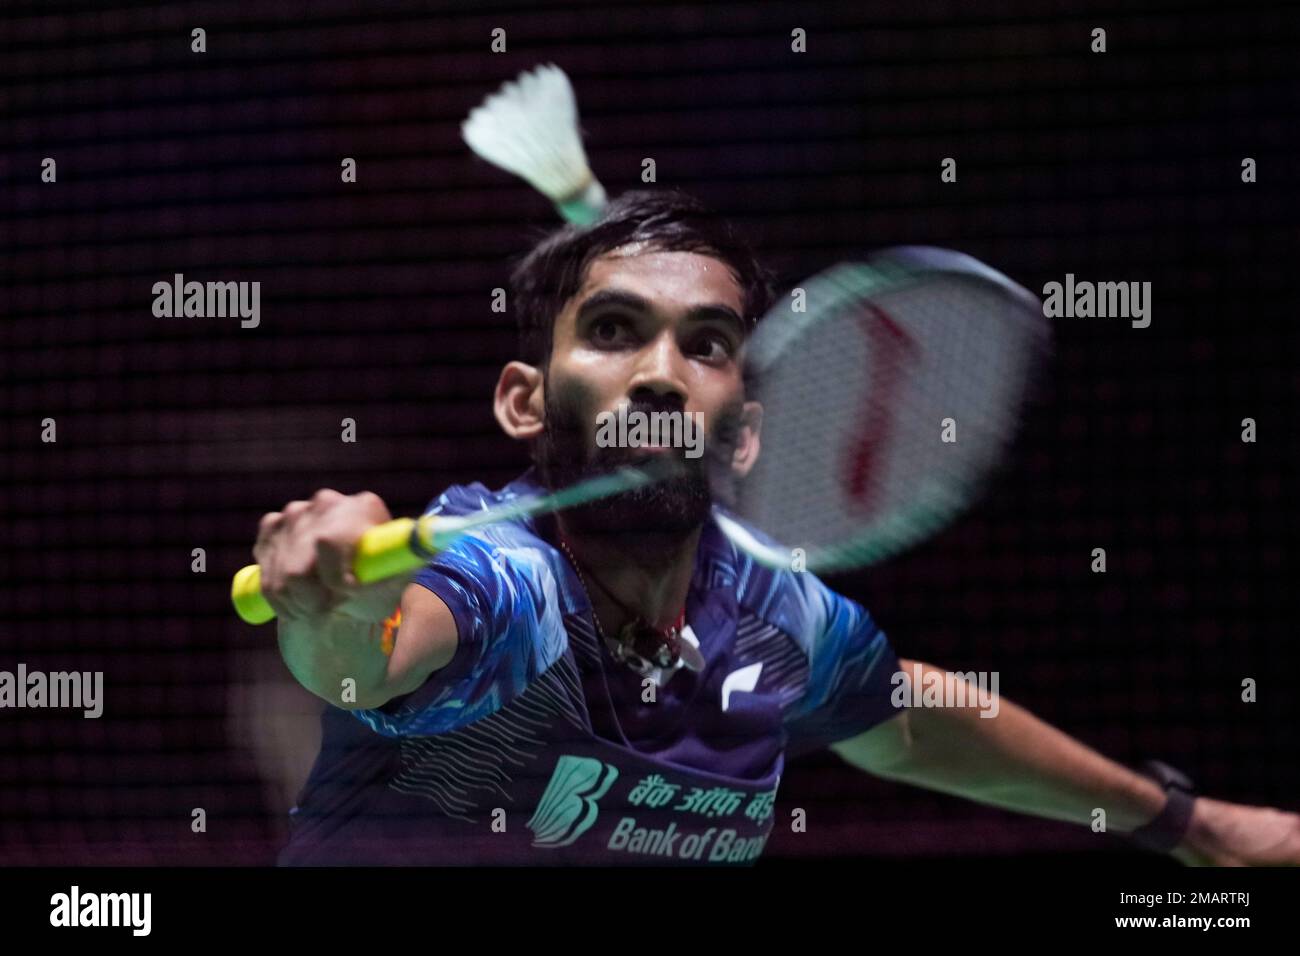 Kidambi Srikanth of India competes during a badminton game of the mens singles against Nhat Nguyen of Ireland in the BWF World Championships in Tokyo, Monday, Aug